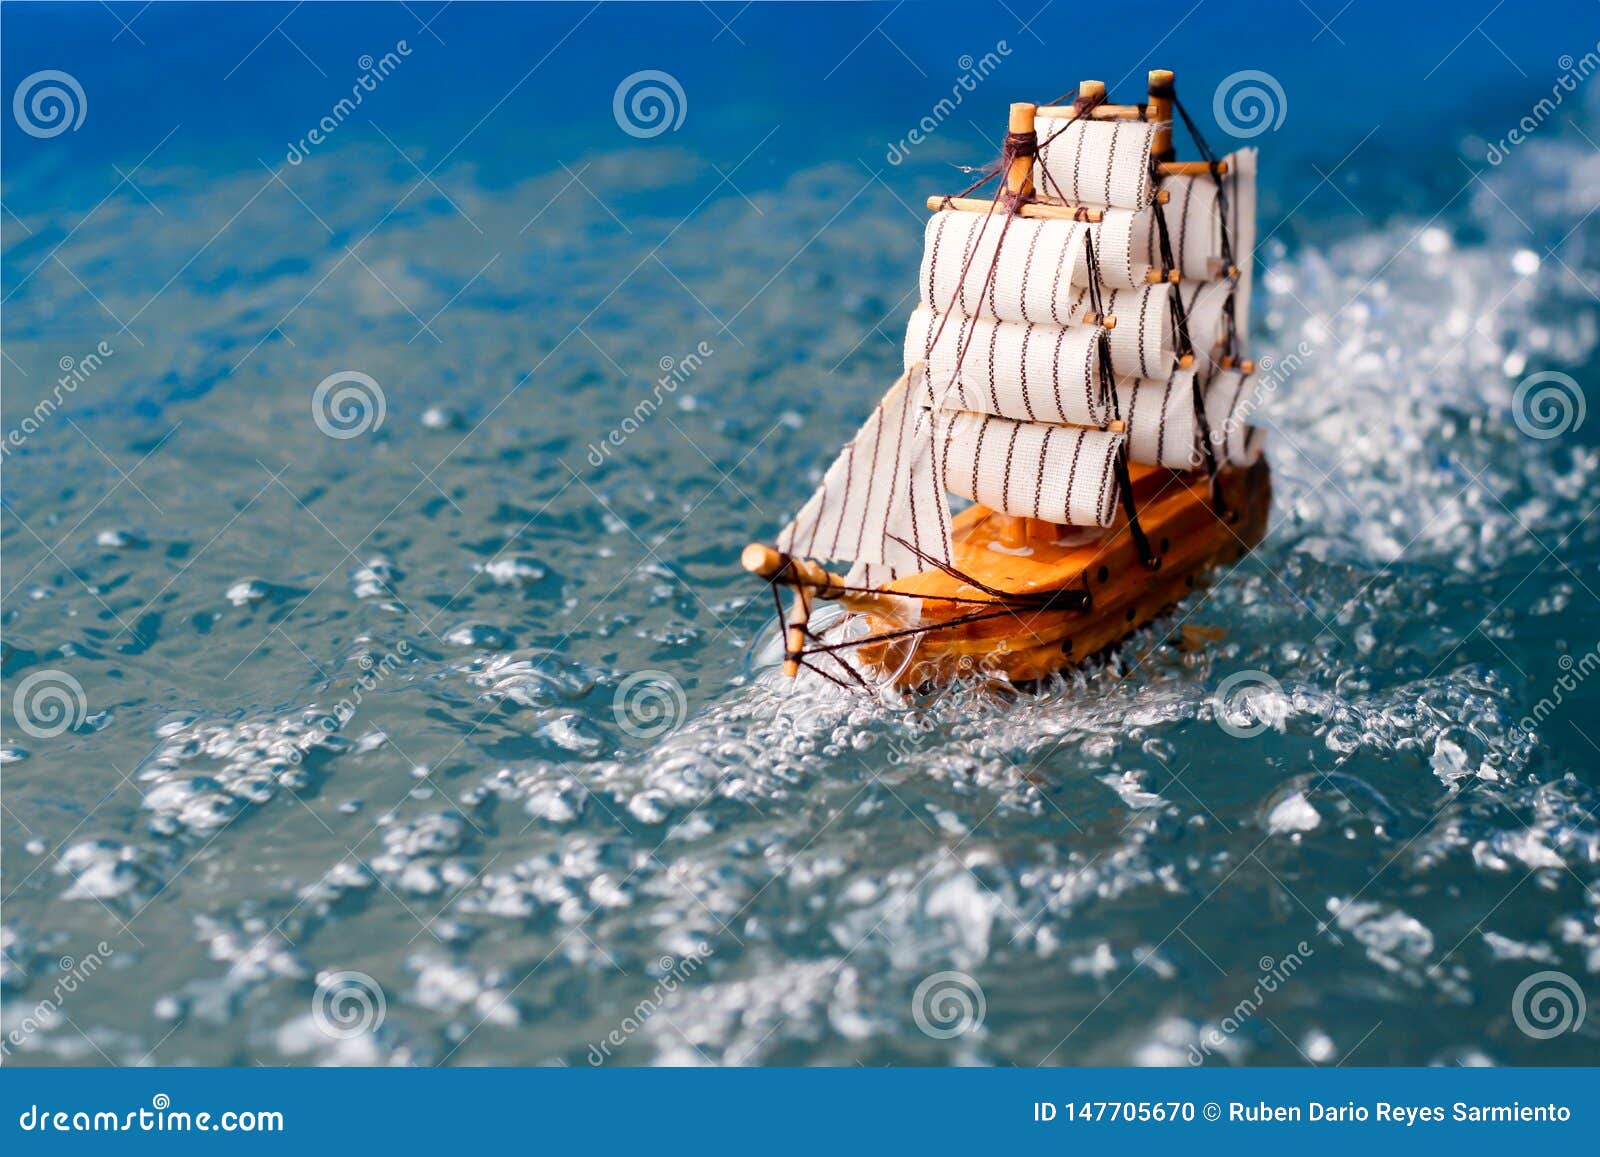 Small Toy Boat in the Water with Big Waves White Wooden Ship Model Sailboat  Background Gold Stock Photo - Image of sailboat, vessel: 147705670